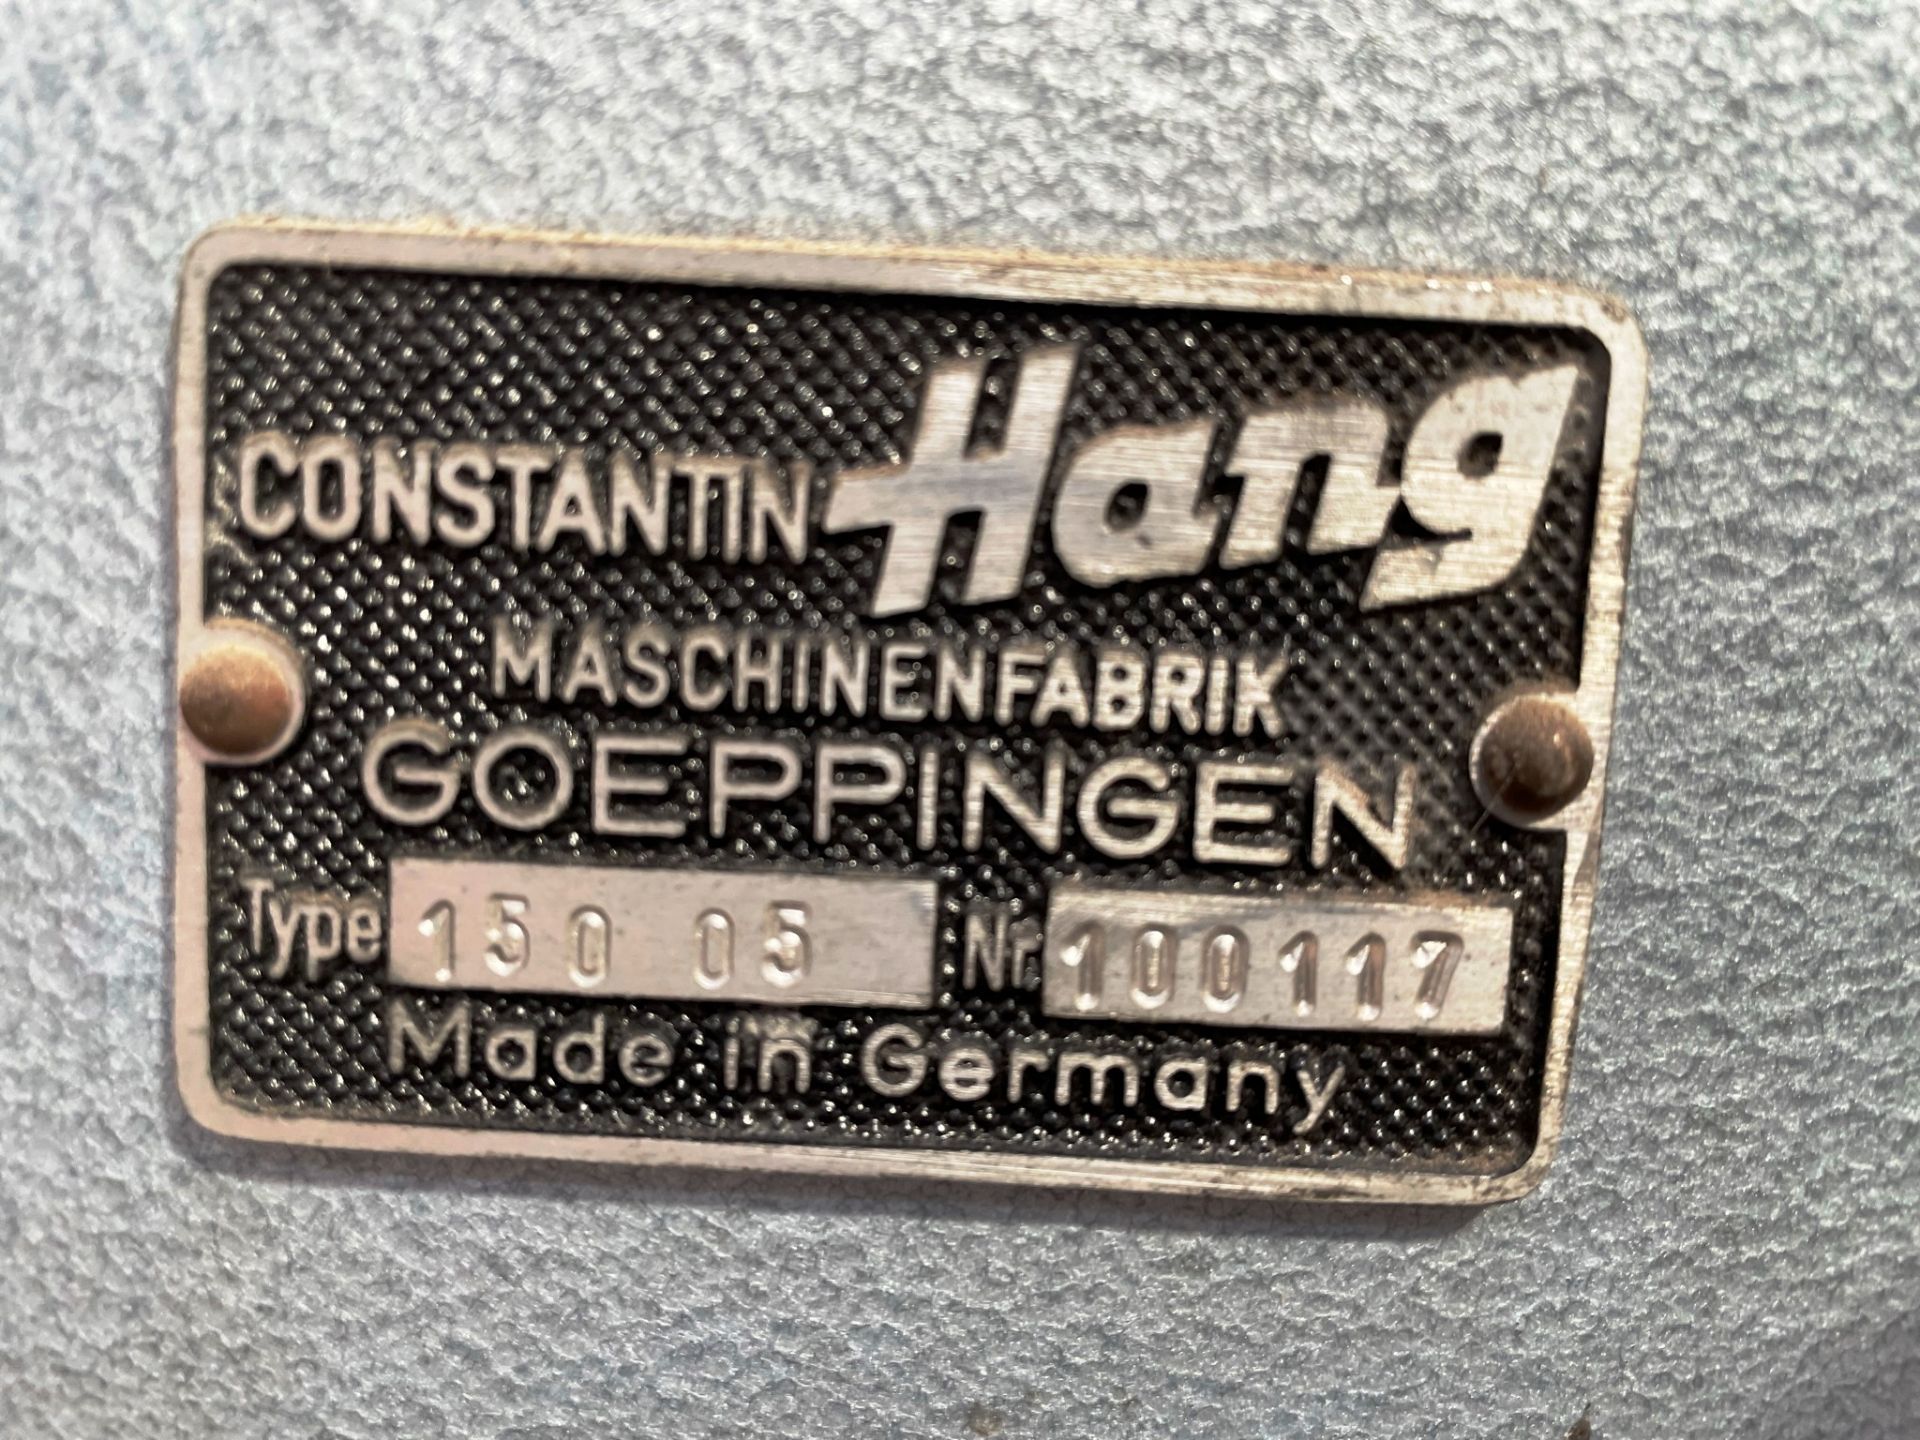 Constantin Hang 150 05 double head riveting machine - Image 8 of 12